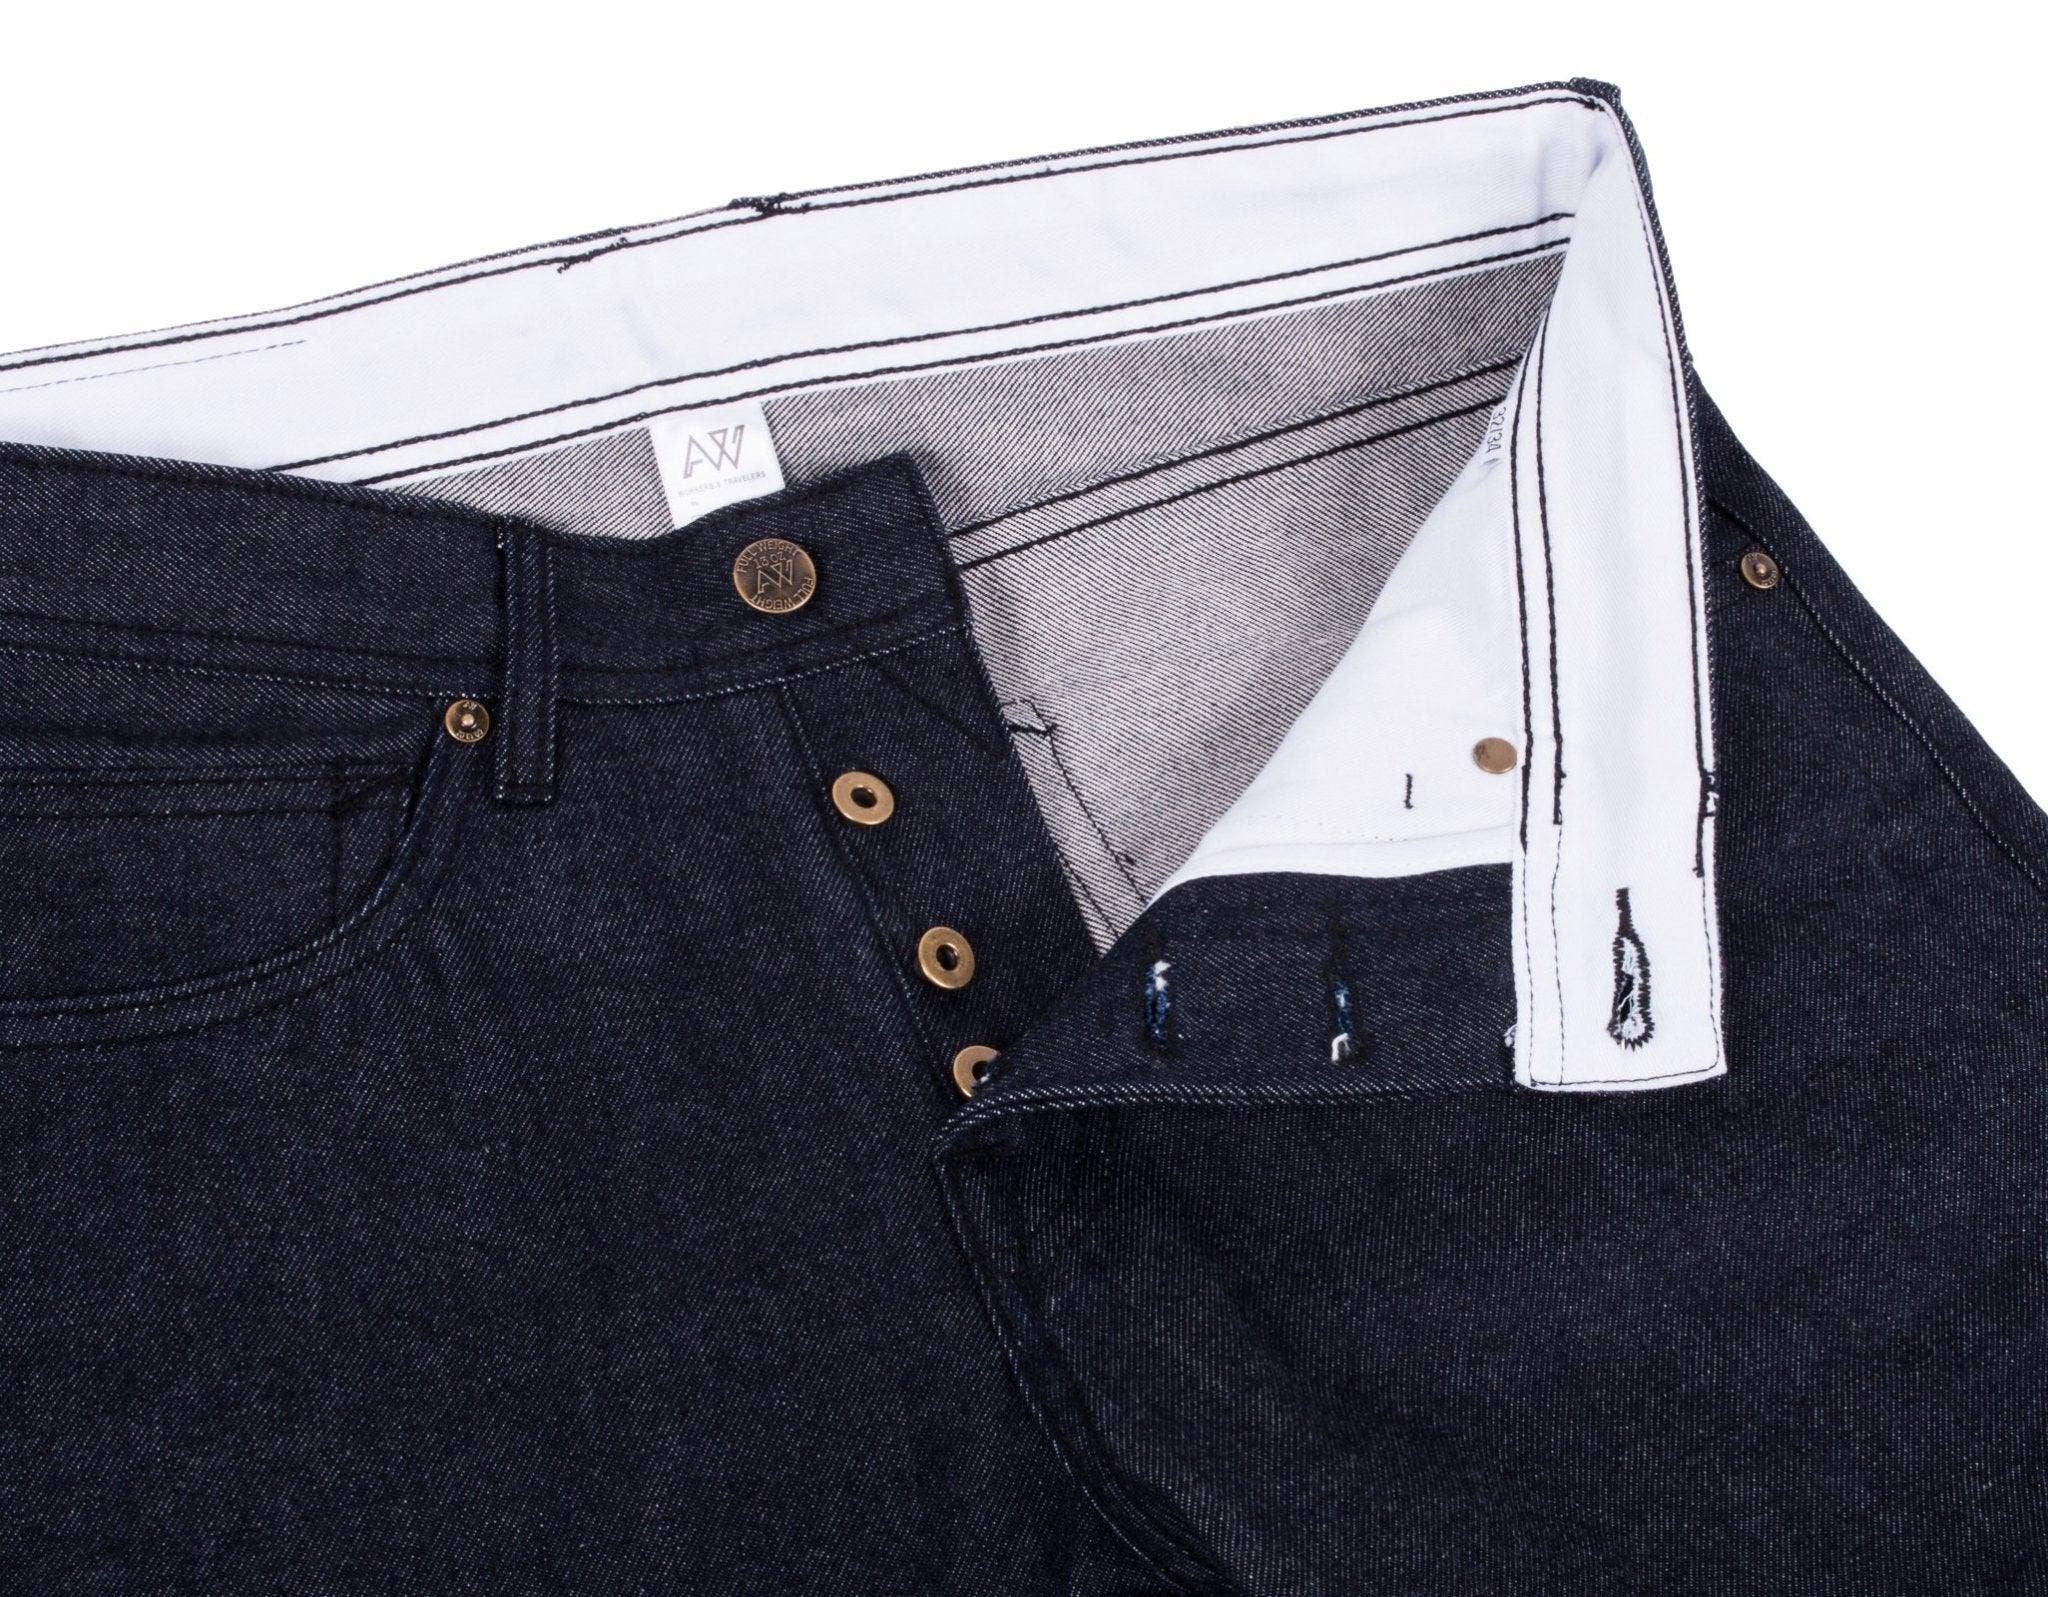 Update Your Urban Look with the RMC Vintage Denim Jeans